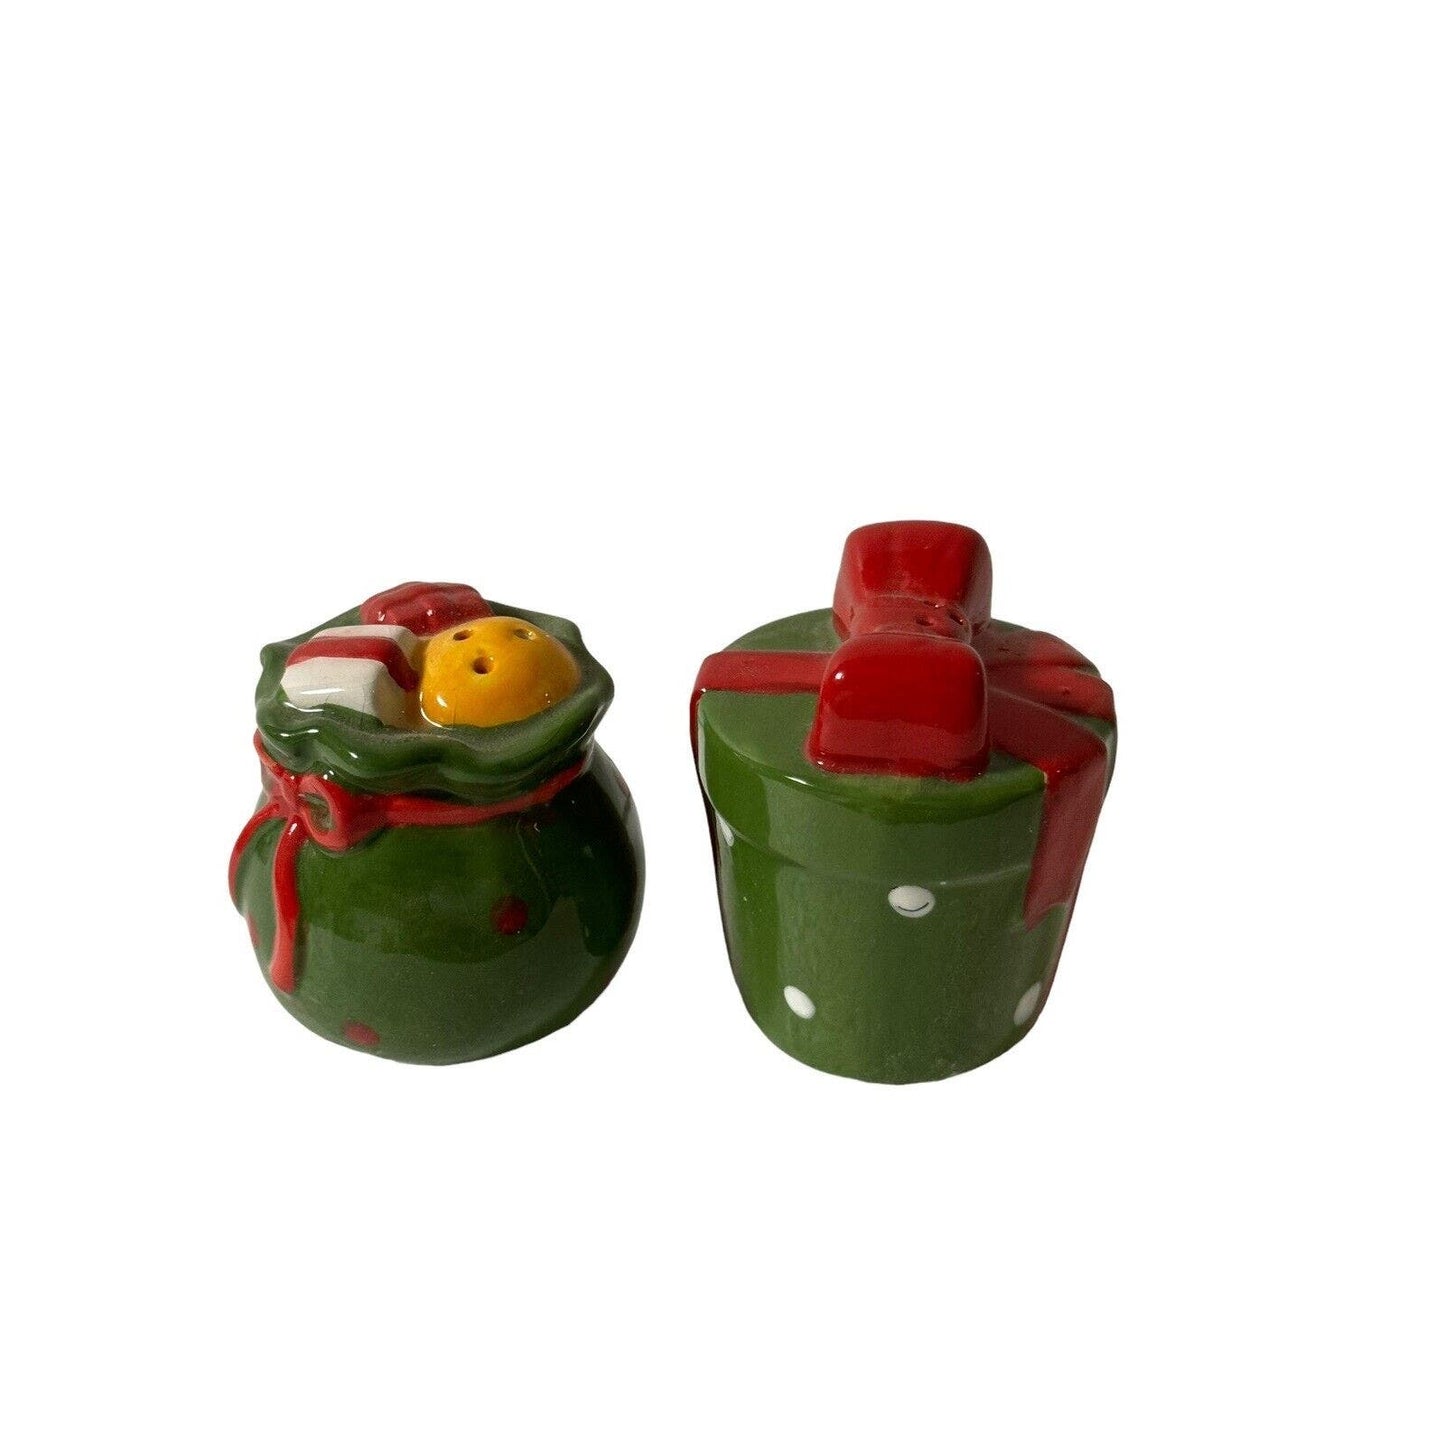 Christmas Presents Sack For Of Presents Ceramic Salt And Pepper Shakers 2”